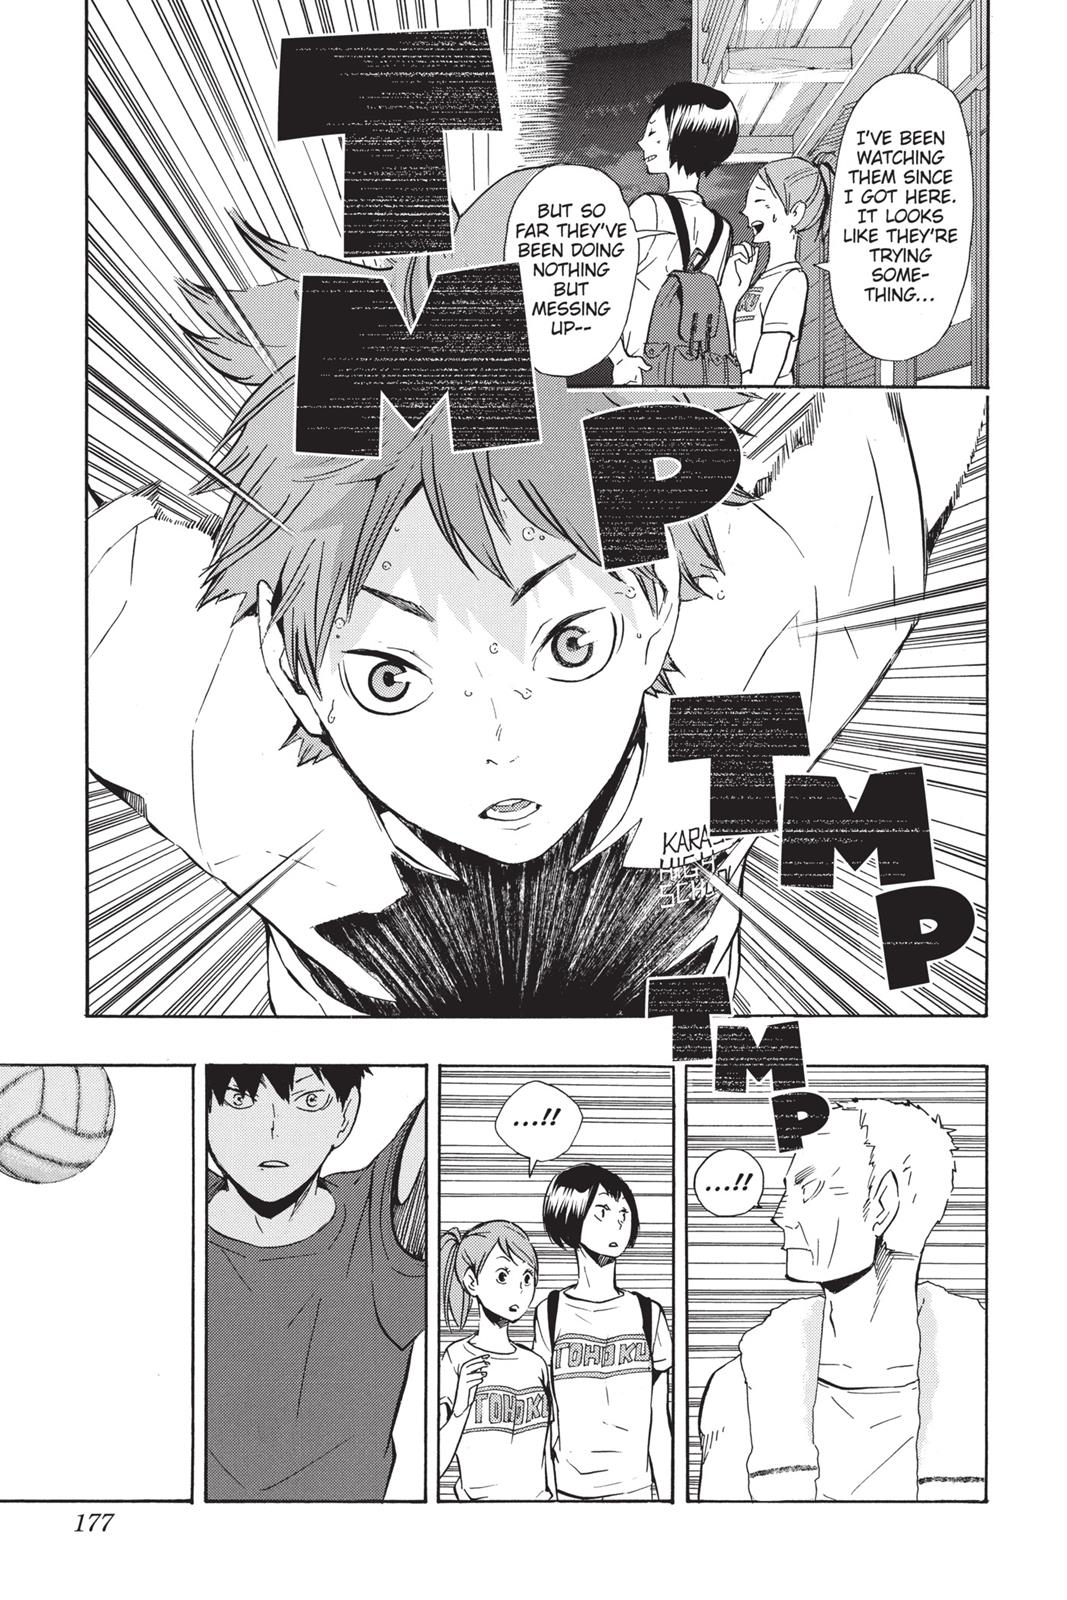  Chapter 98 image 009